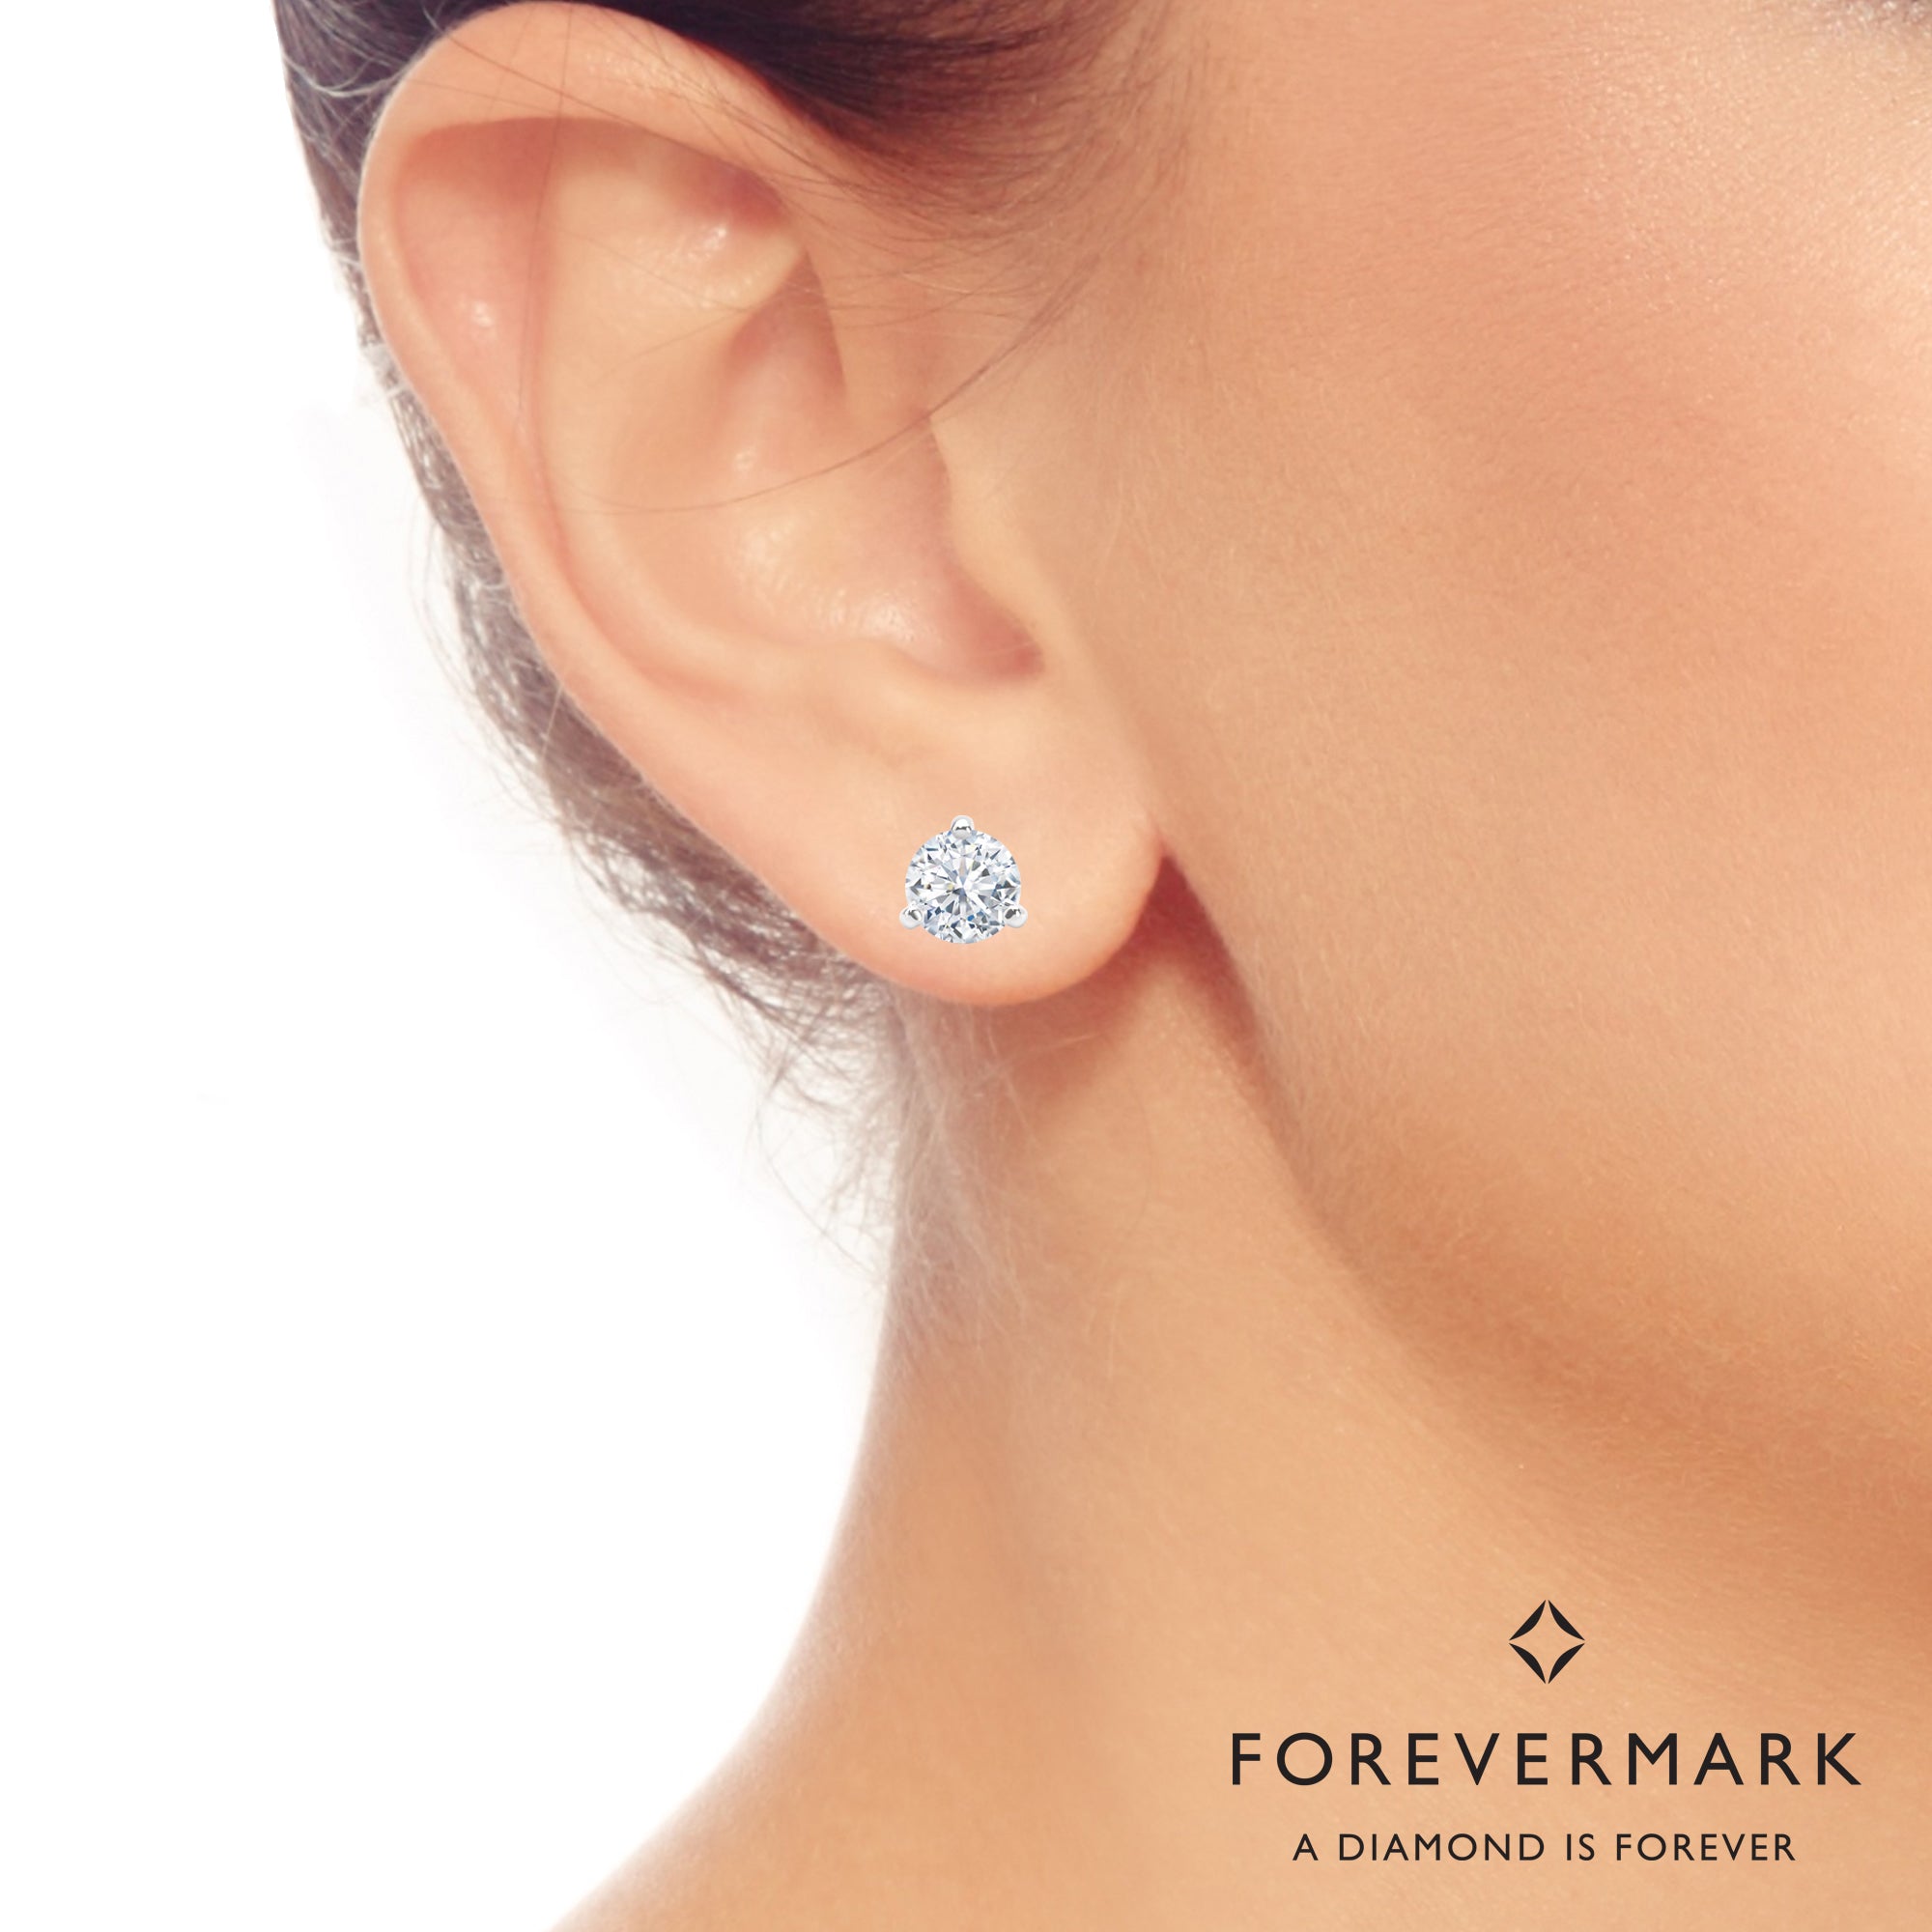 De Beers Forevermark Center of My Universe Diamond Earrings in 18kt White Gold (7/8ct tw)